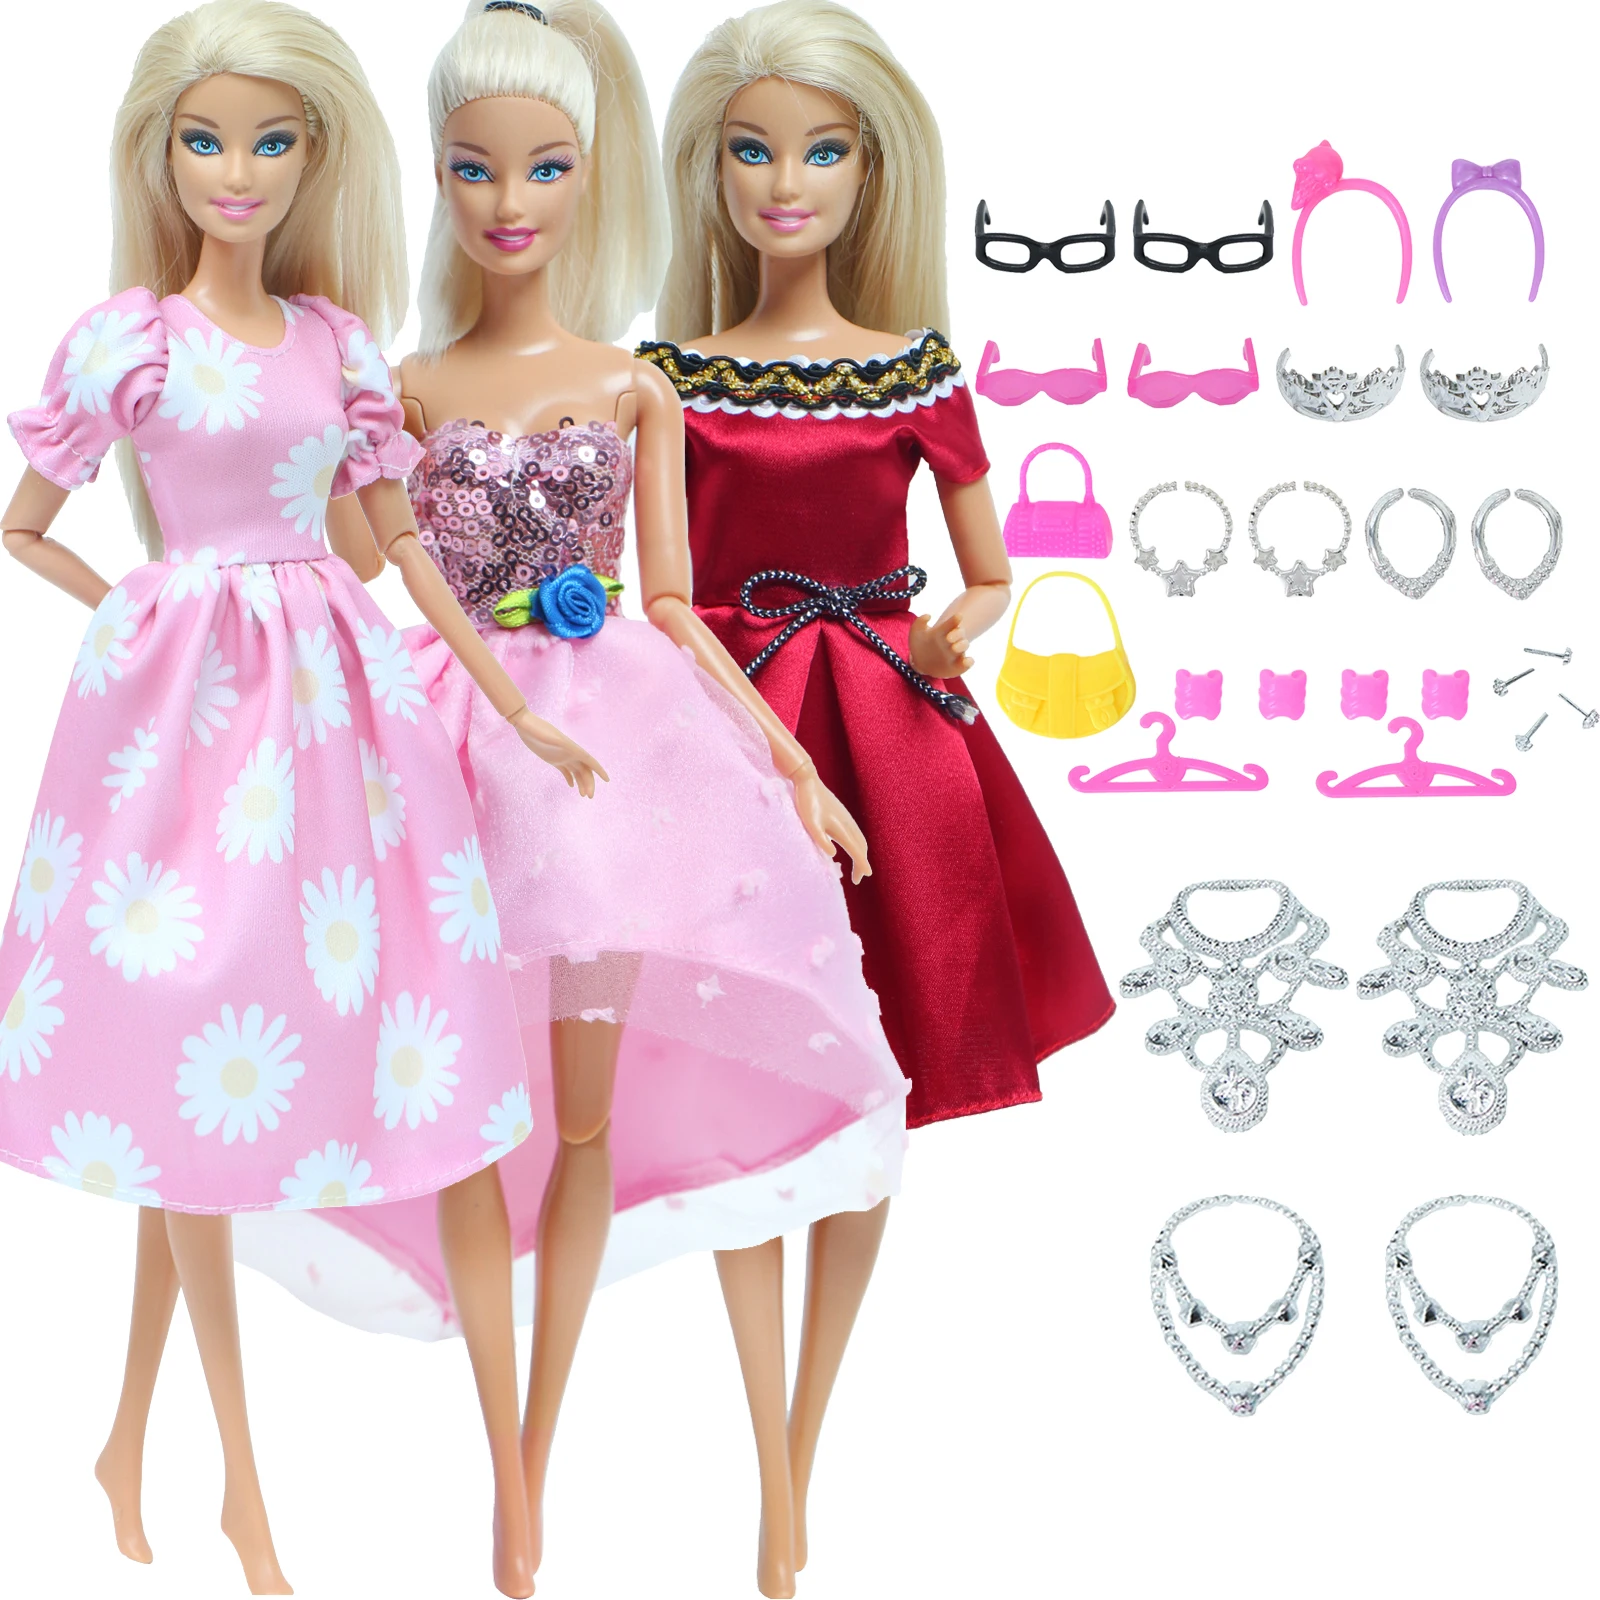 Asiv 17Pcs= 5Pcs Fashion Party Holiday Wedding Princess Clothes Dress with 12 Pairs of Shoes for Barbie Dolls